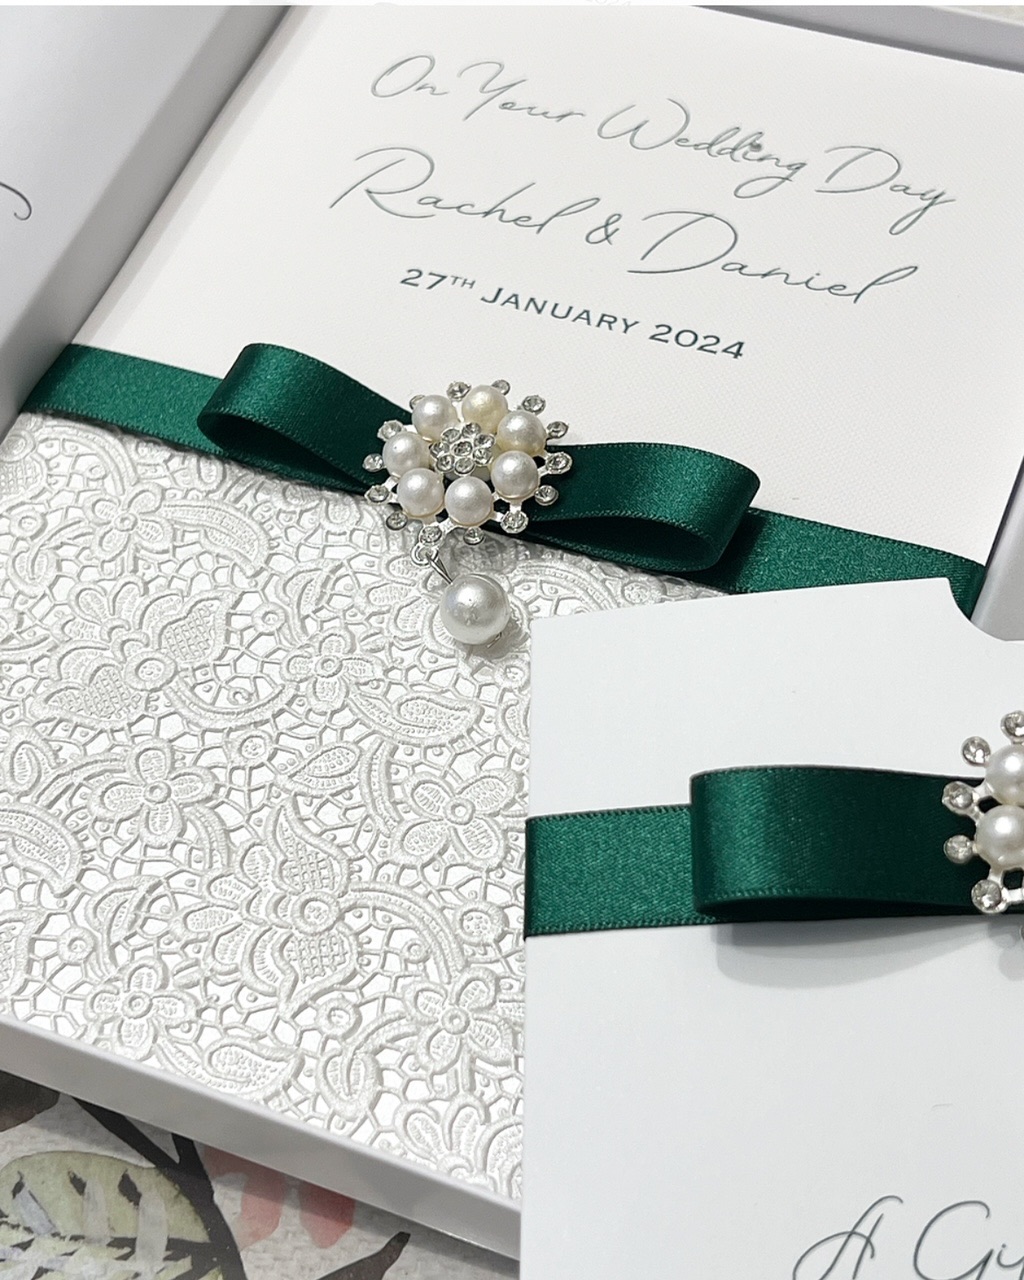 Beautiful boxed wedding day cards